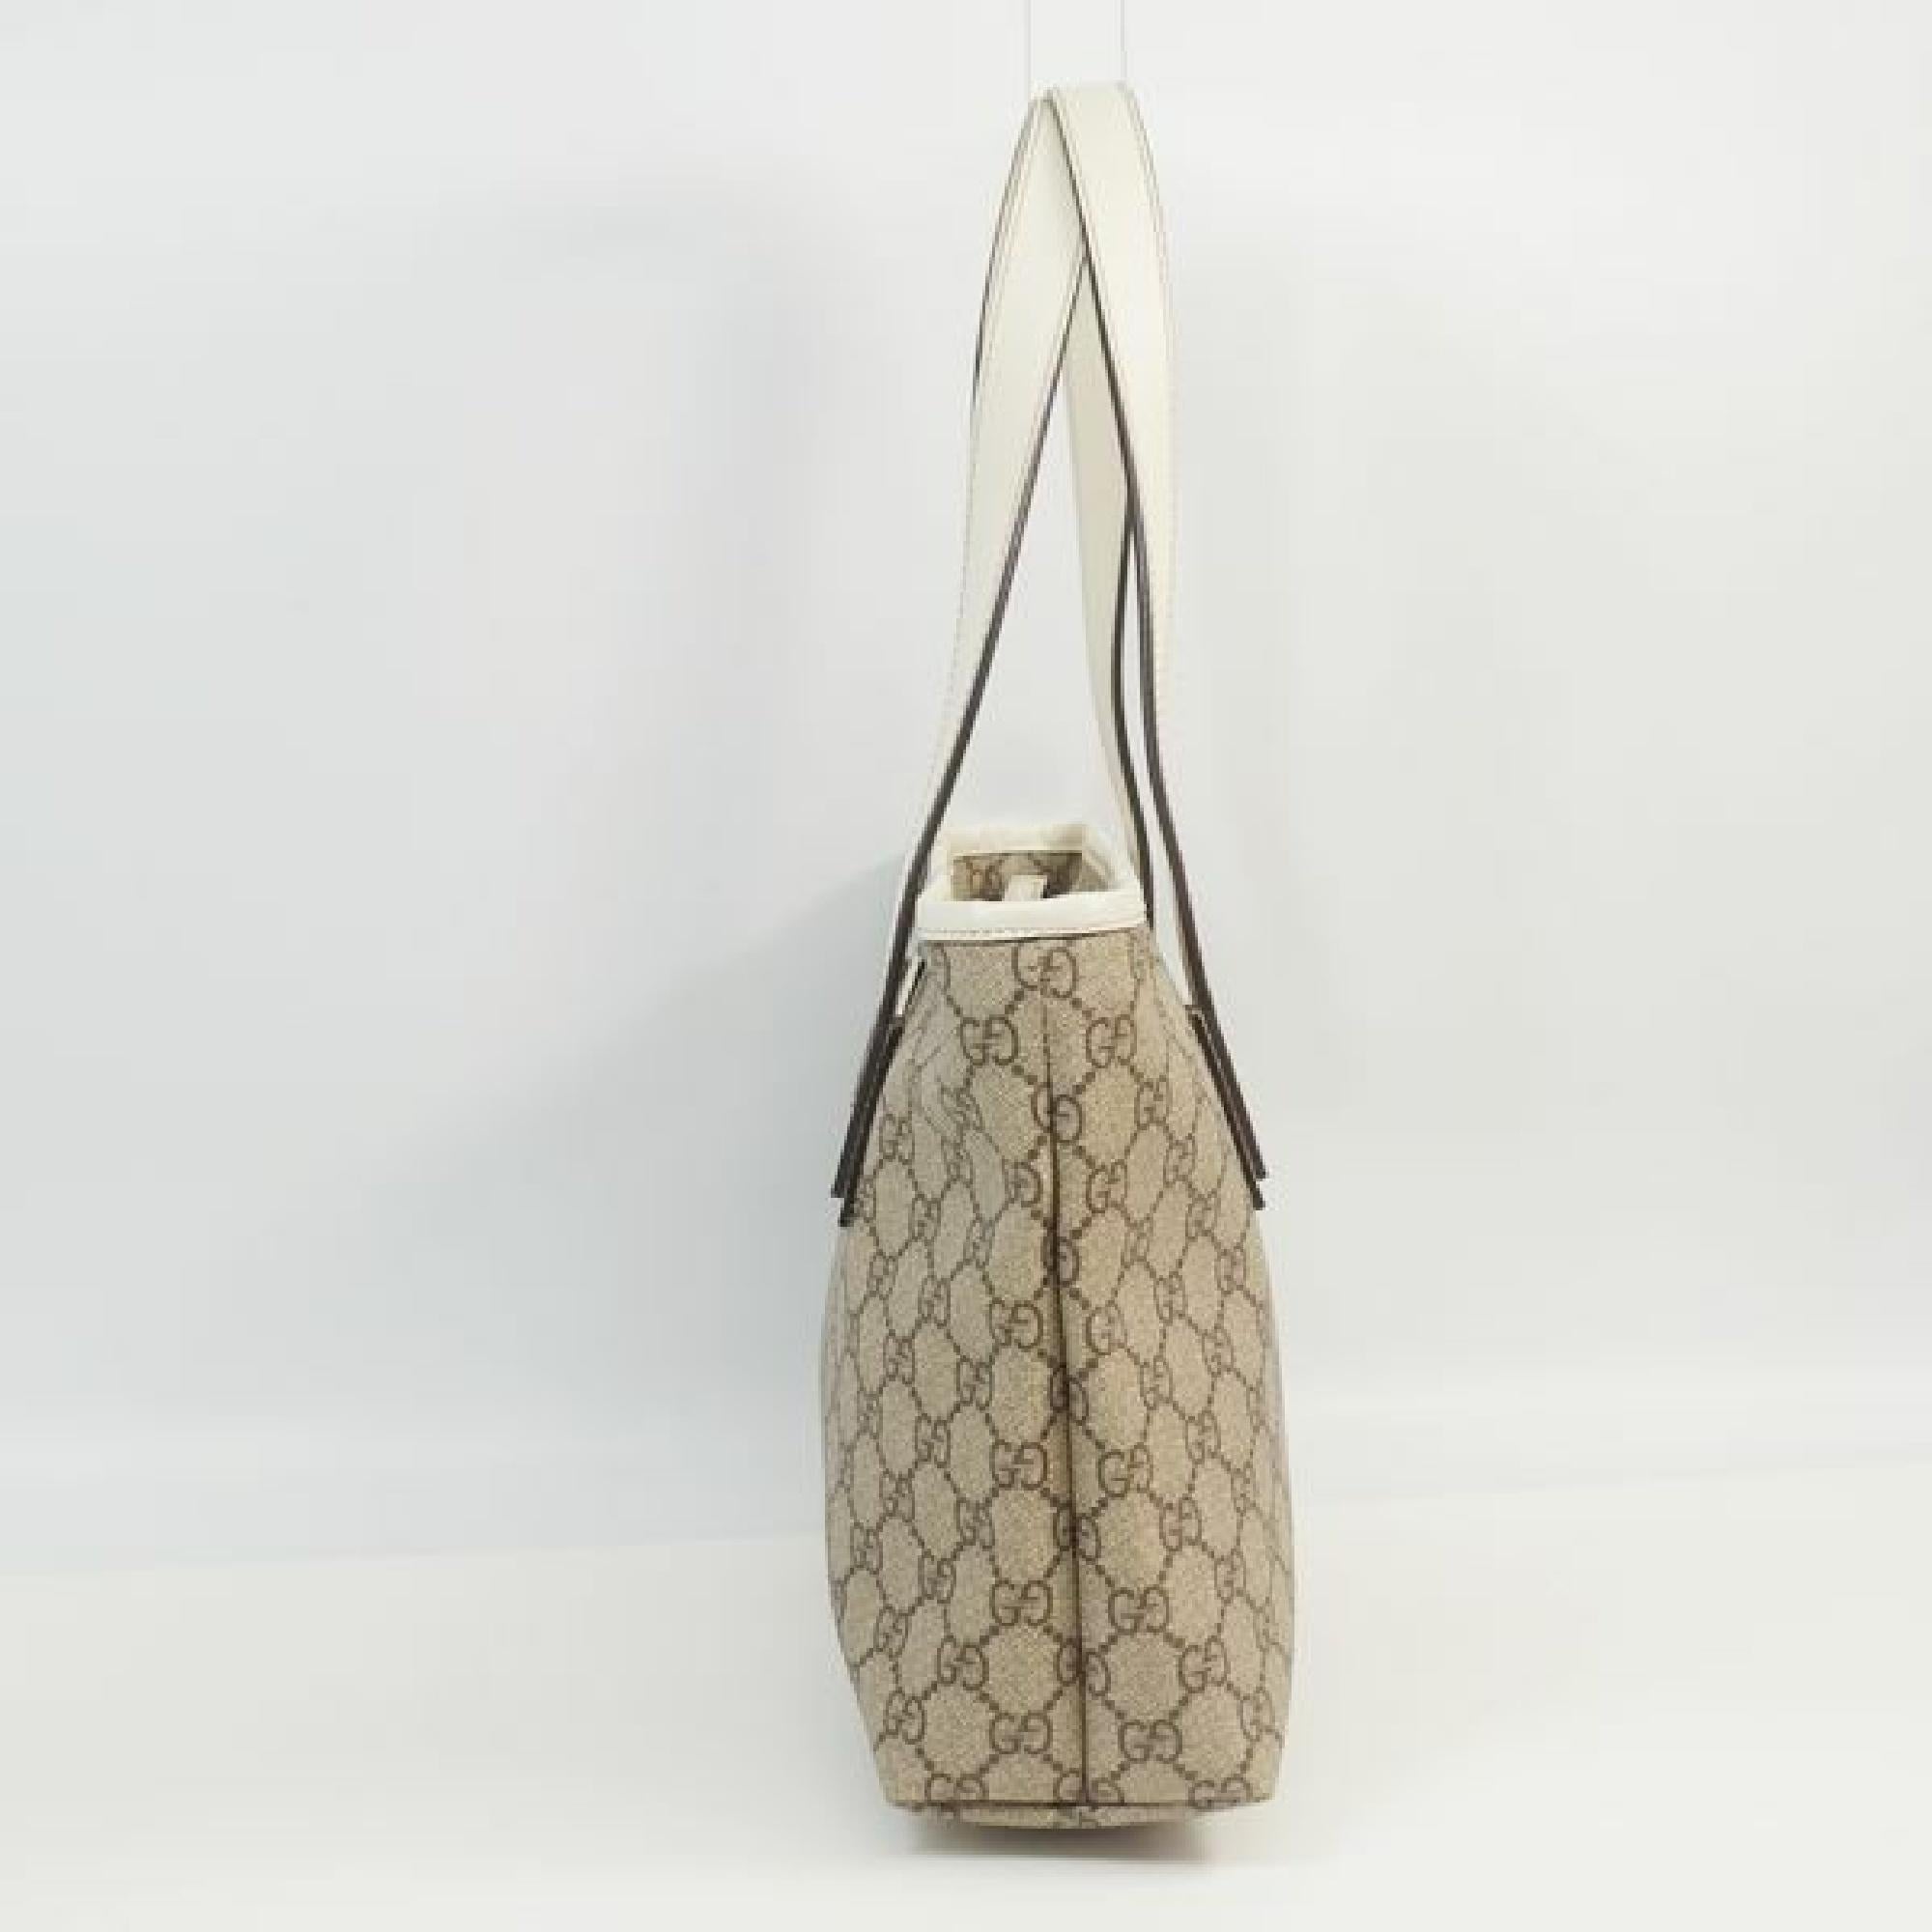 An authentic GUCCI GG plus shoulder Womens tote bag 211138 The outside material is coating canvas/ leather. The pattern is GG plus  shoulder. This item is Contemporary. The year of manufacture would be 1986.
Rank
A beautiful goods
Used items with